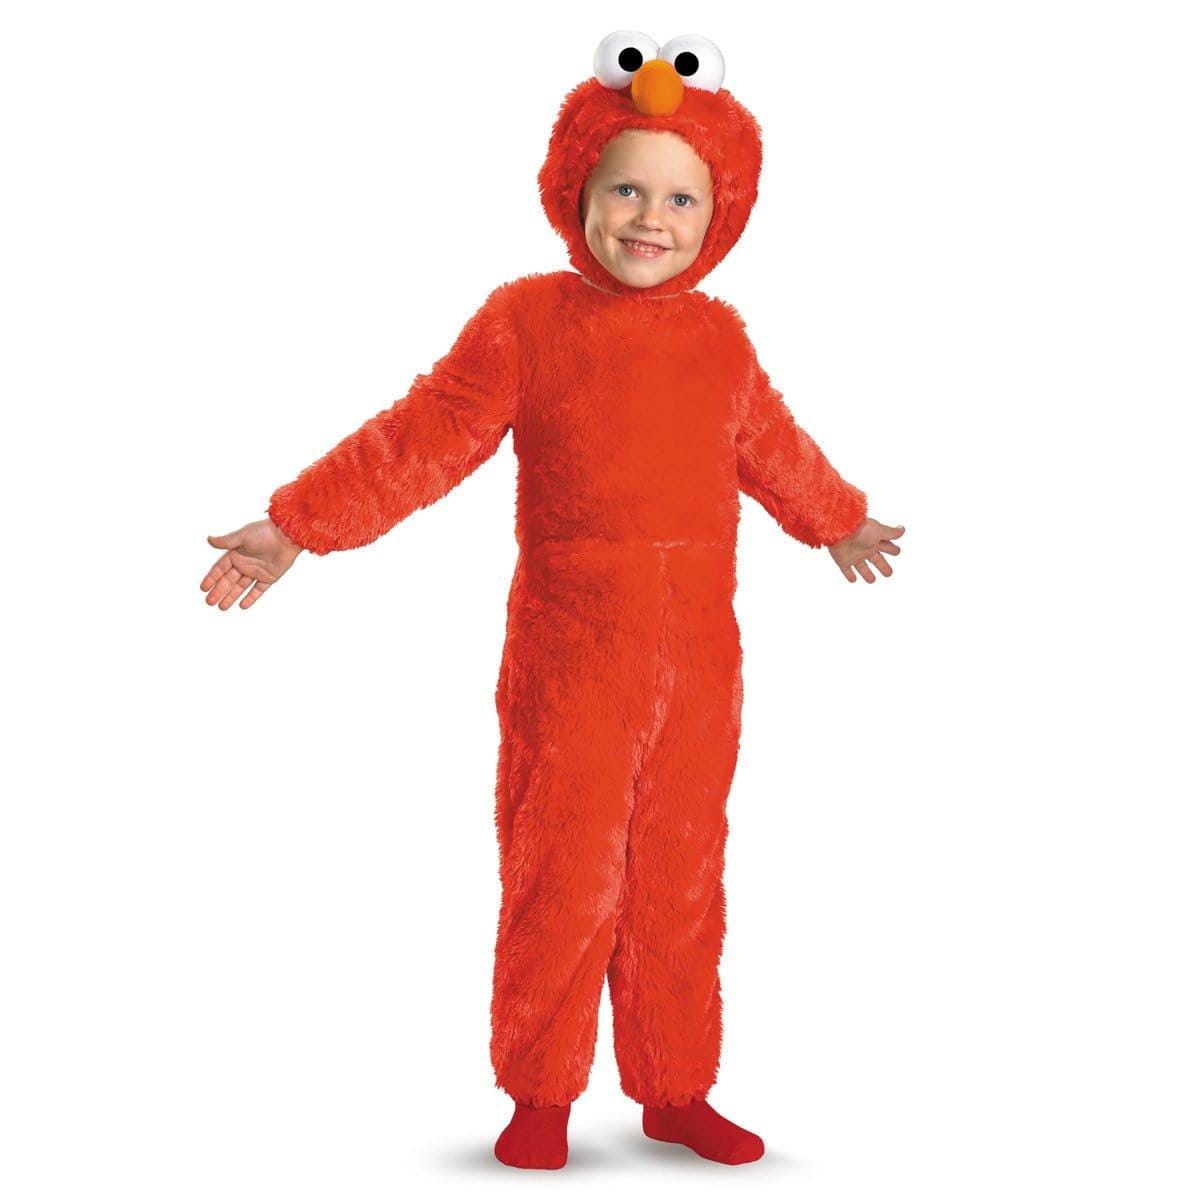 Buy Costumes Elmo Costume for Babies & Toddlers, The Muppets sold at Party Expert